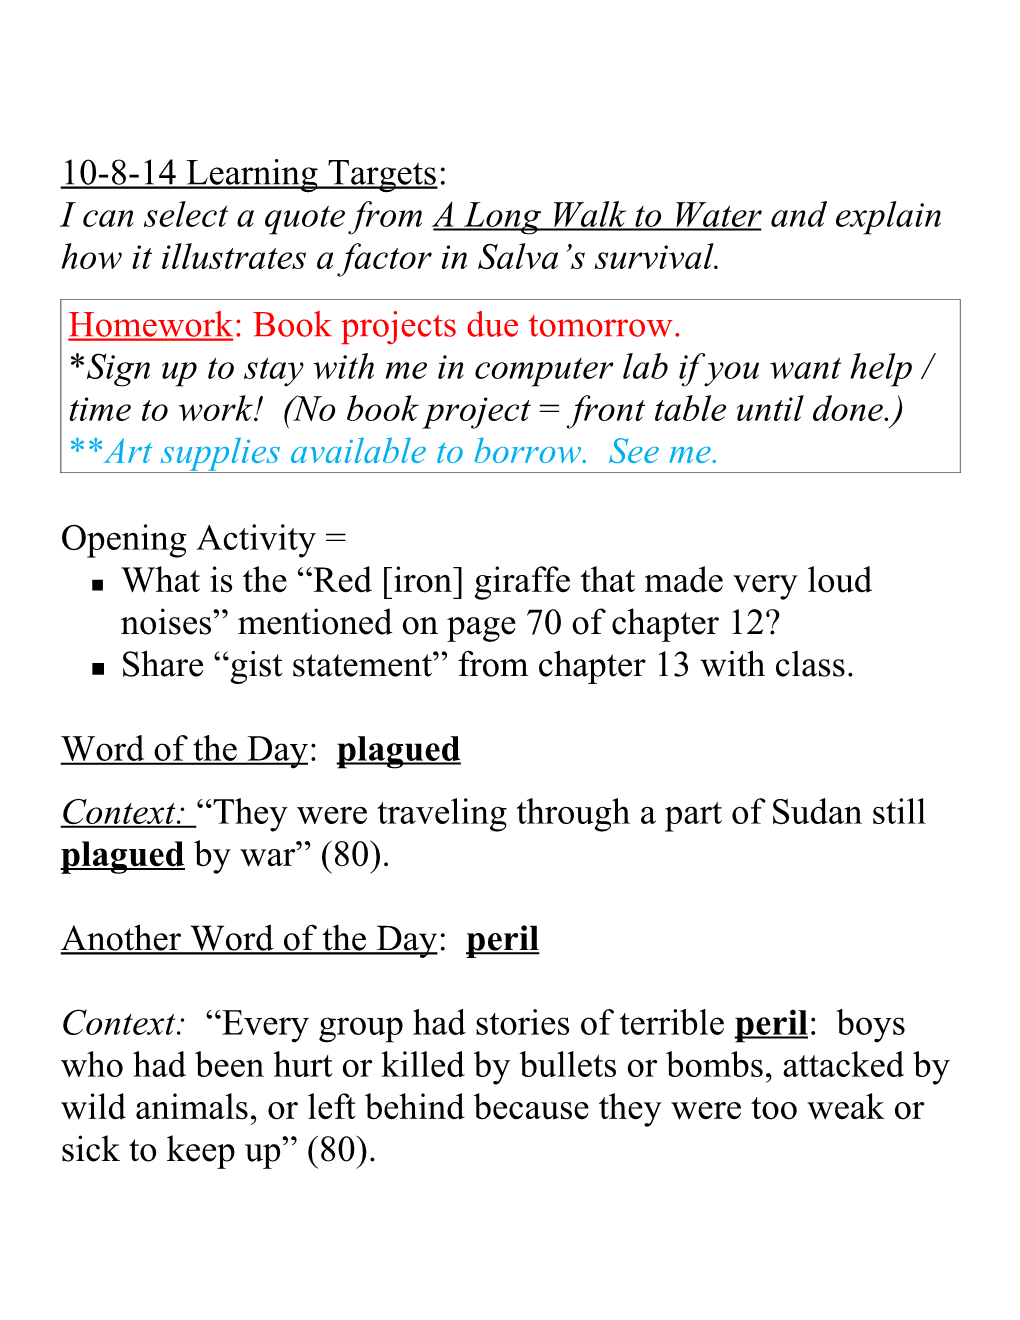 10-8-14 Learning Targets